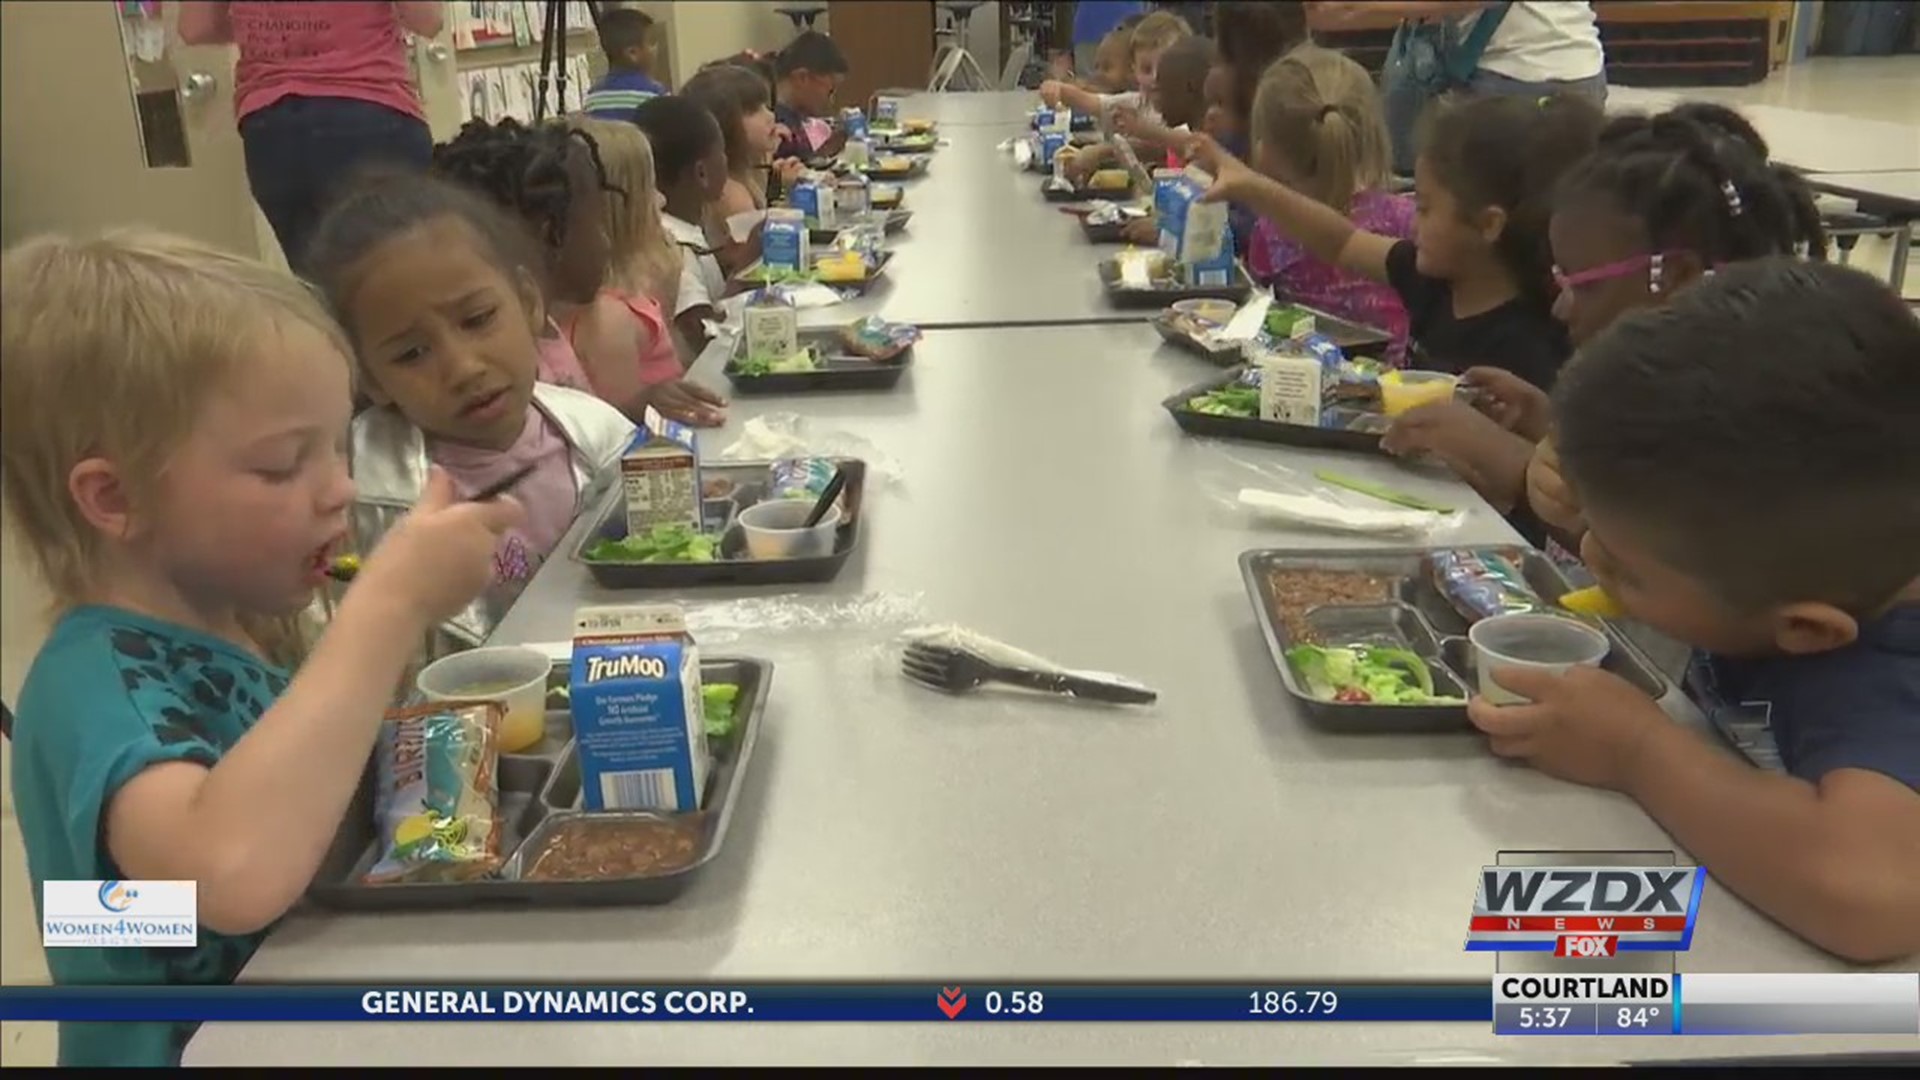 Serving Hope, Inc. is partnering with Boys & Girls Club to get meals to kids in need.